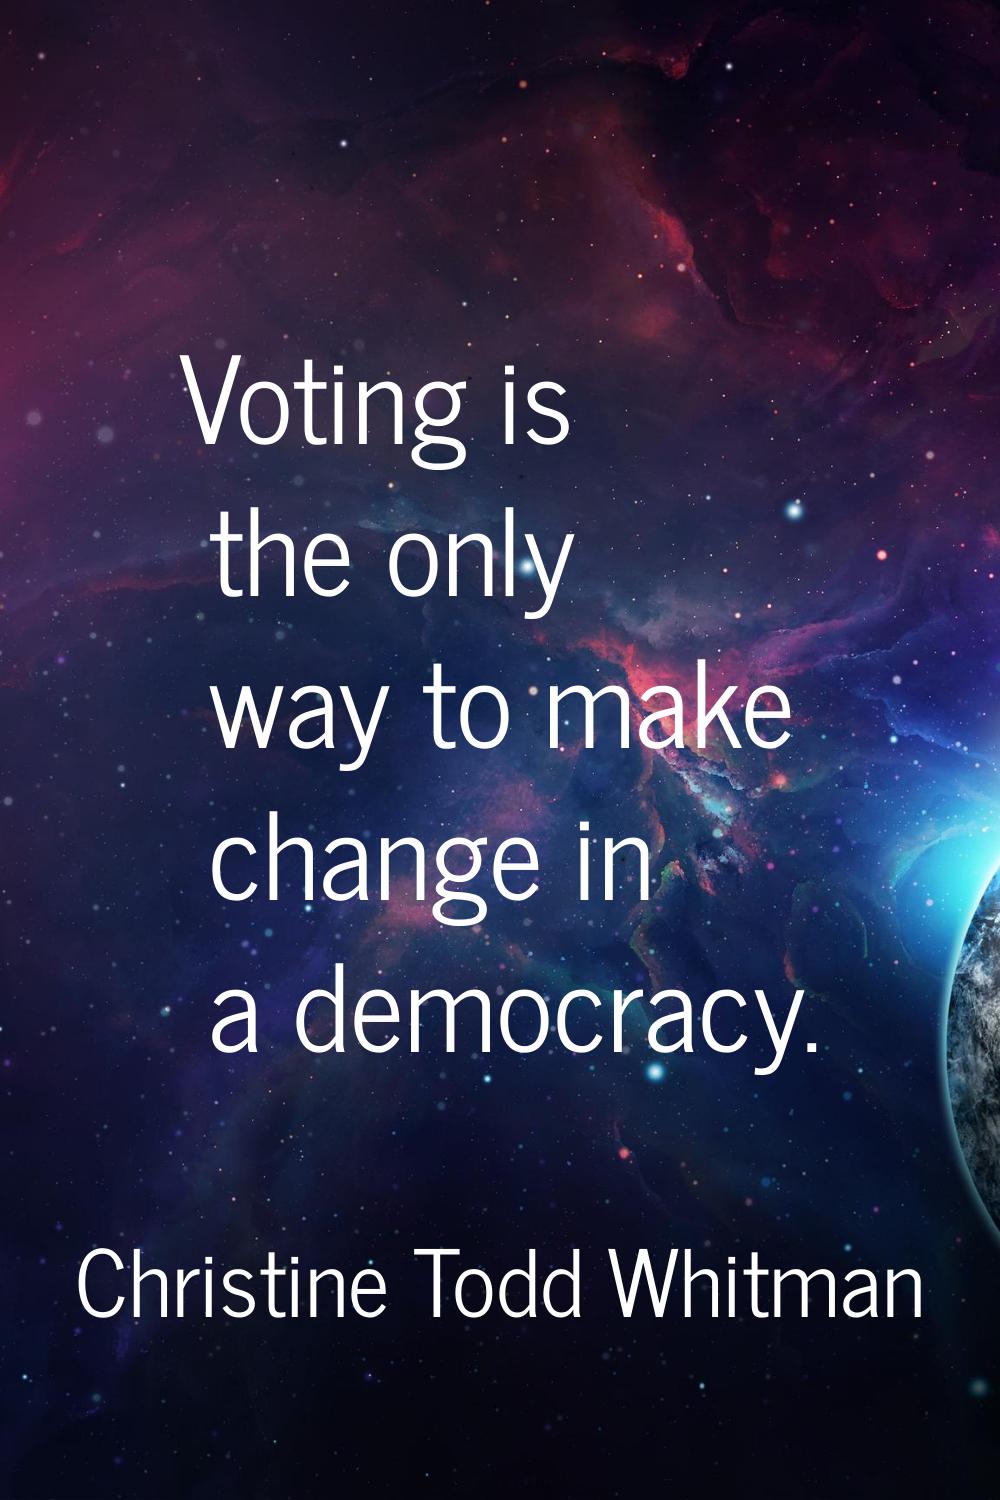 Voting is the only way to make change in a democracy.